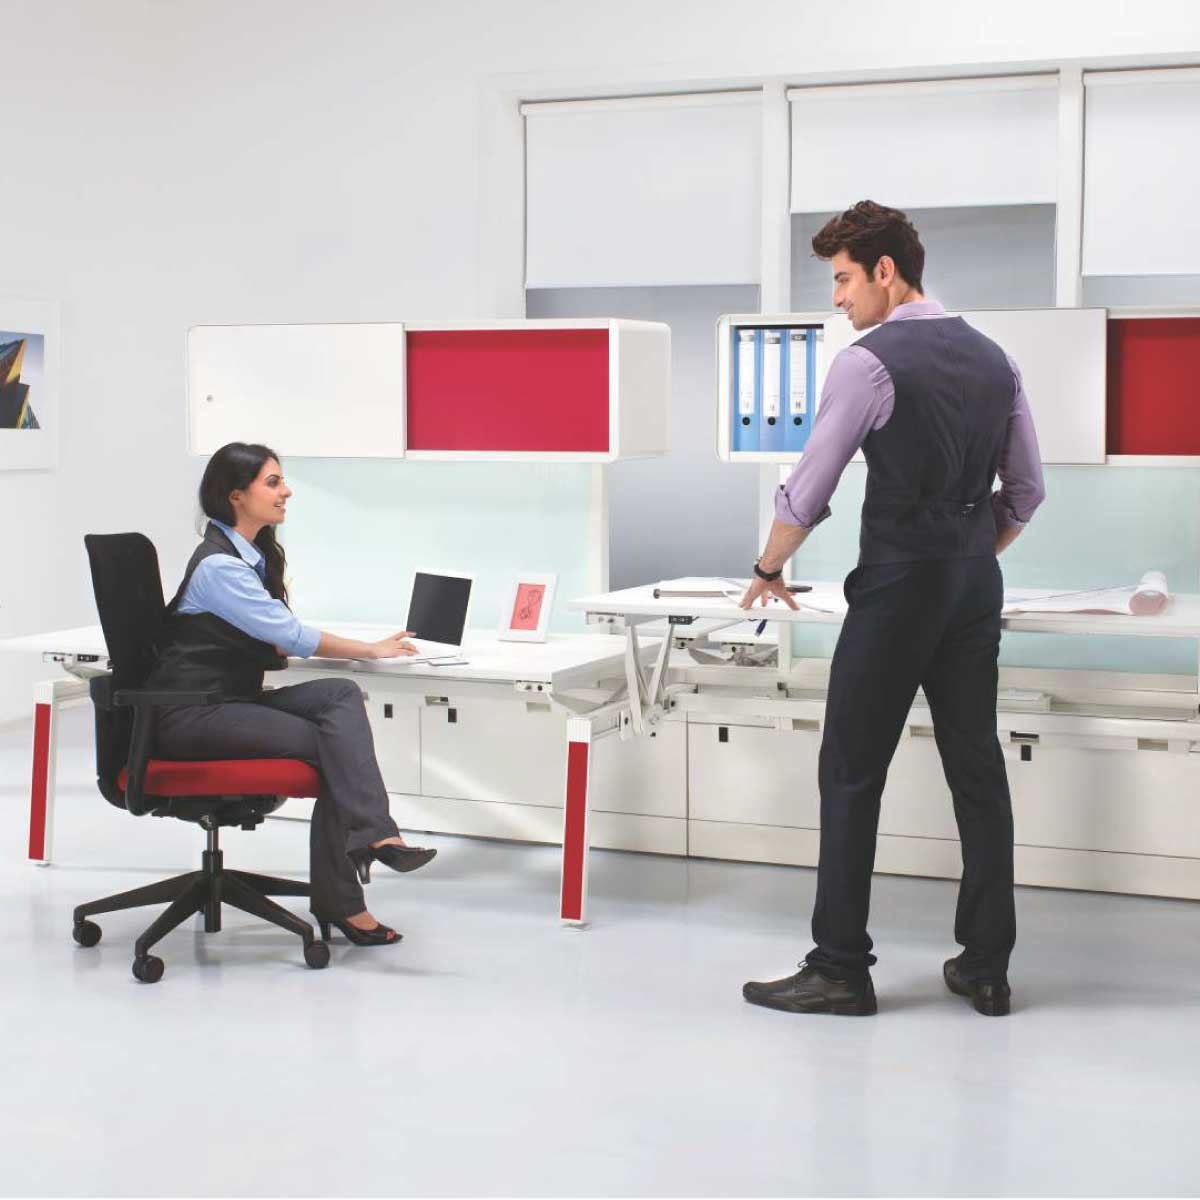 Adjustable Workstations Manufacturers, Suppliers in Noida Sector 134